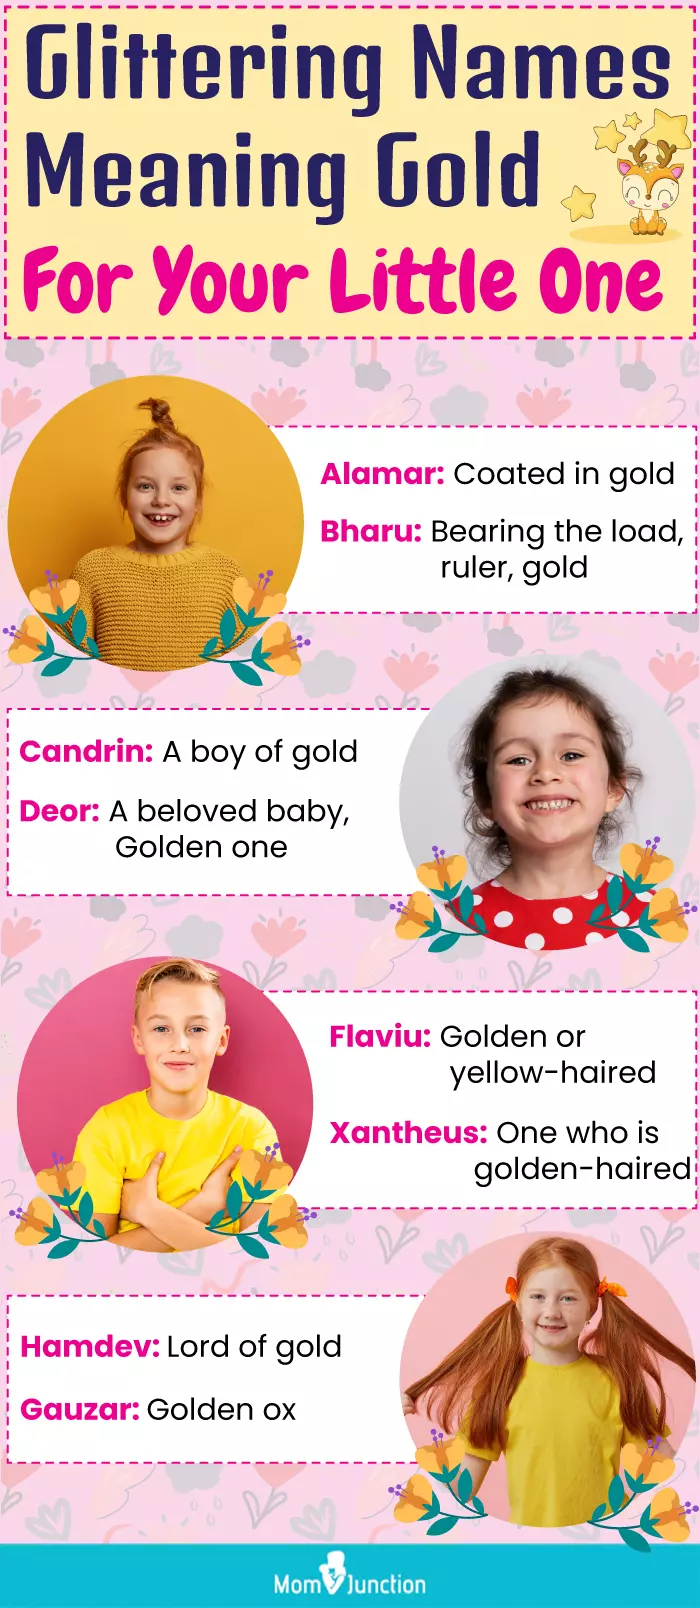 glittering names meaning gold for your little one (infographic)